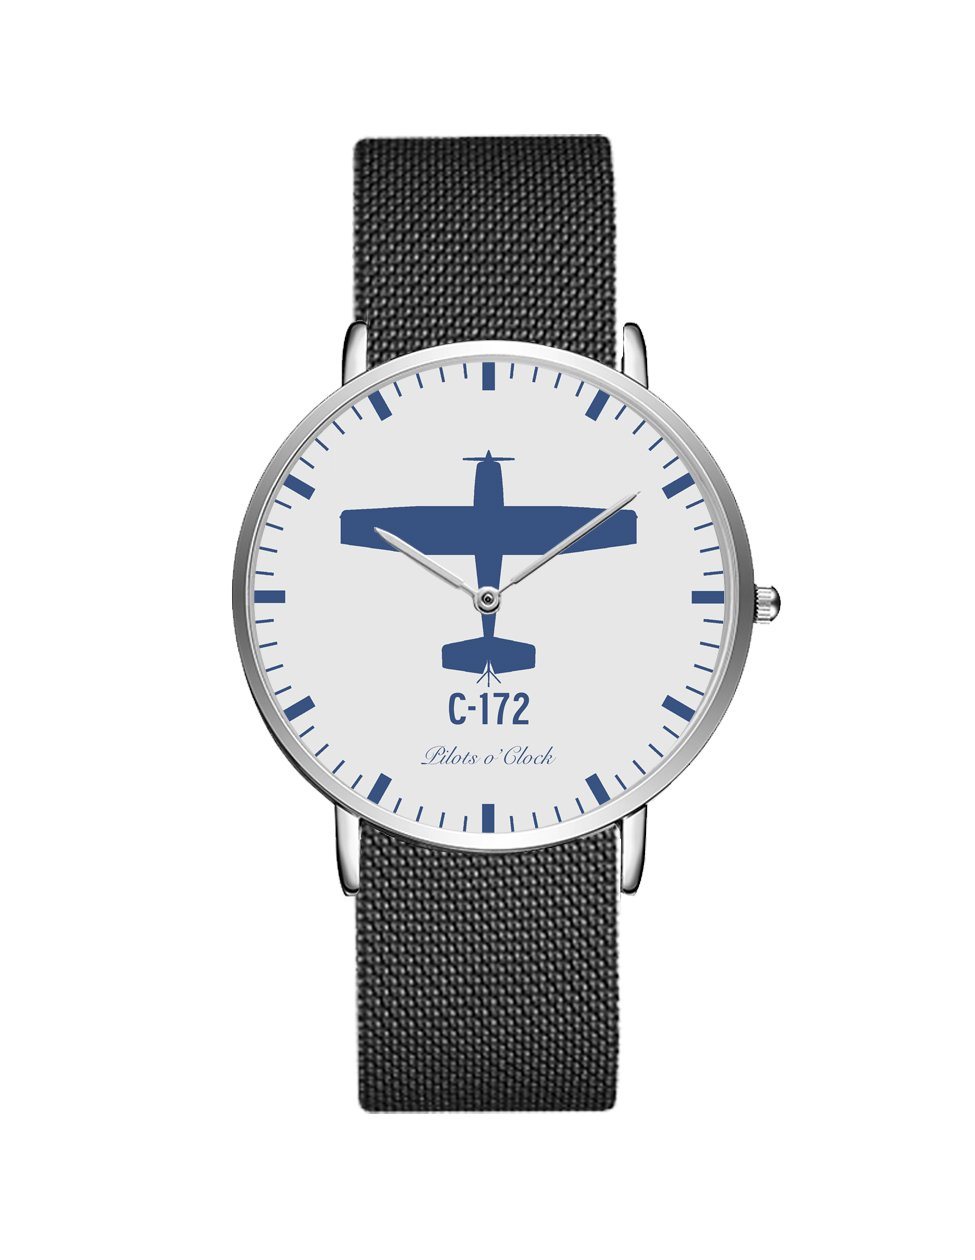 Cessna 172 Stainless Steel Strap Watches Pilot Eyes Store Silver & Black Stainless Steel Strap 